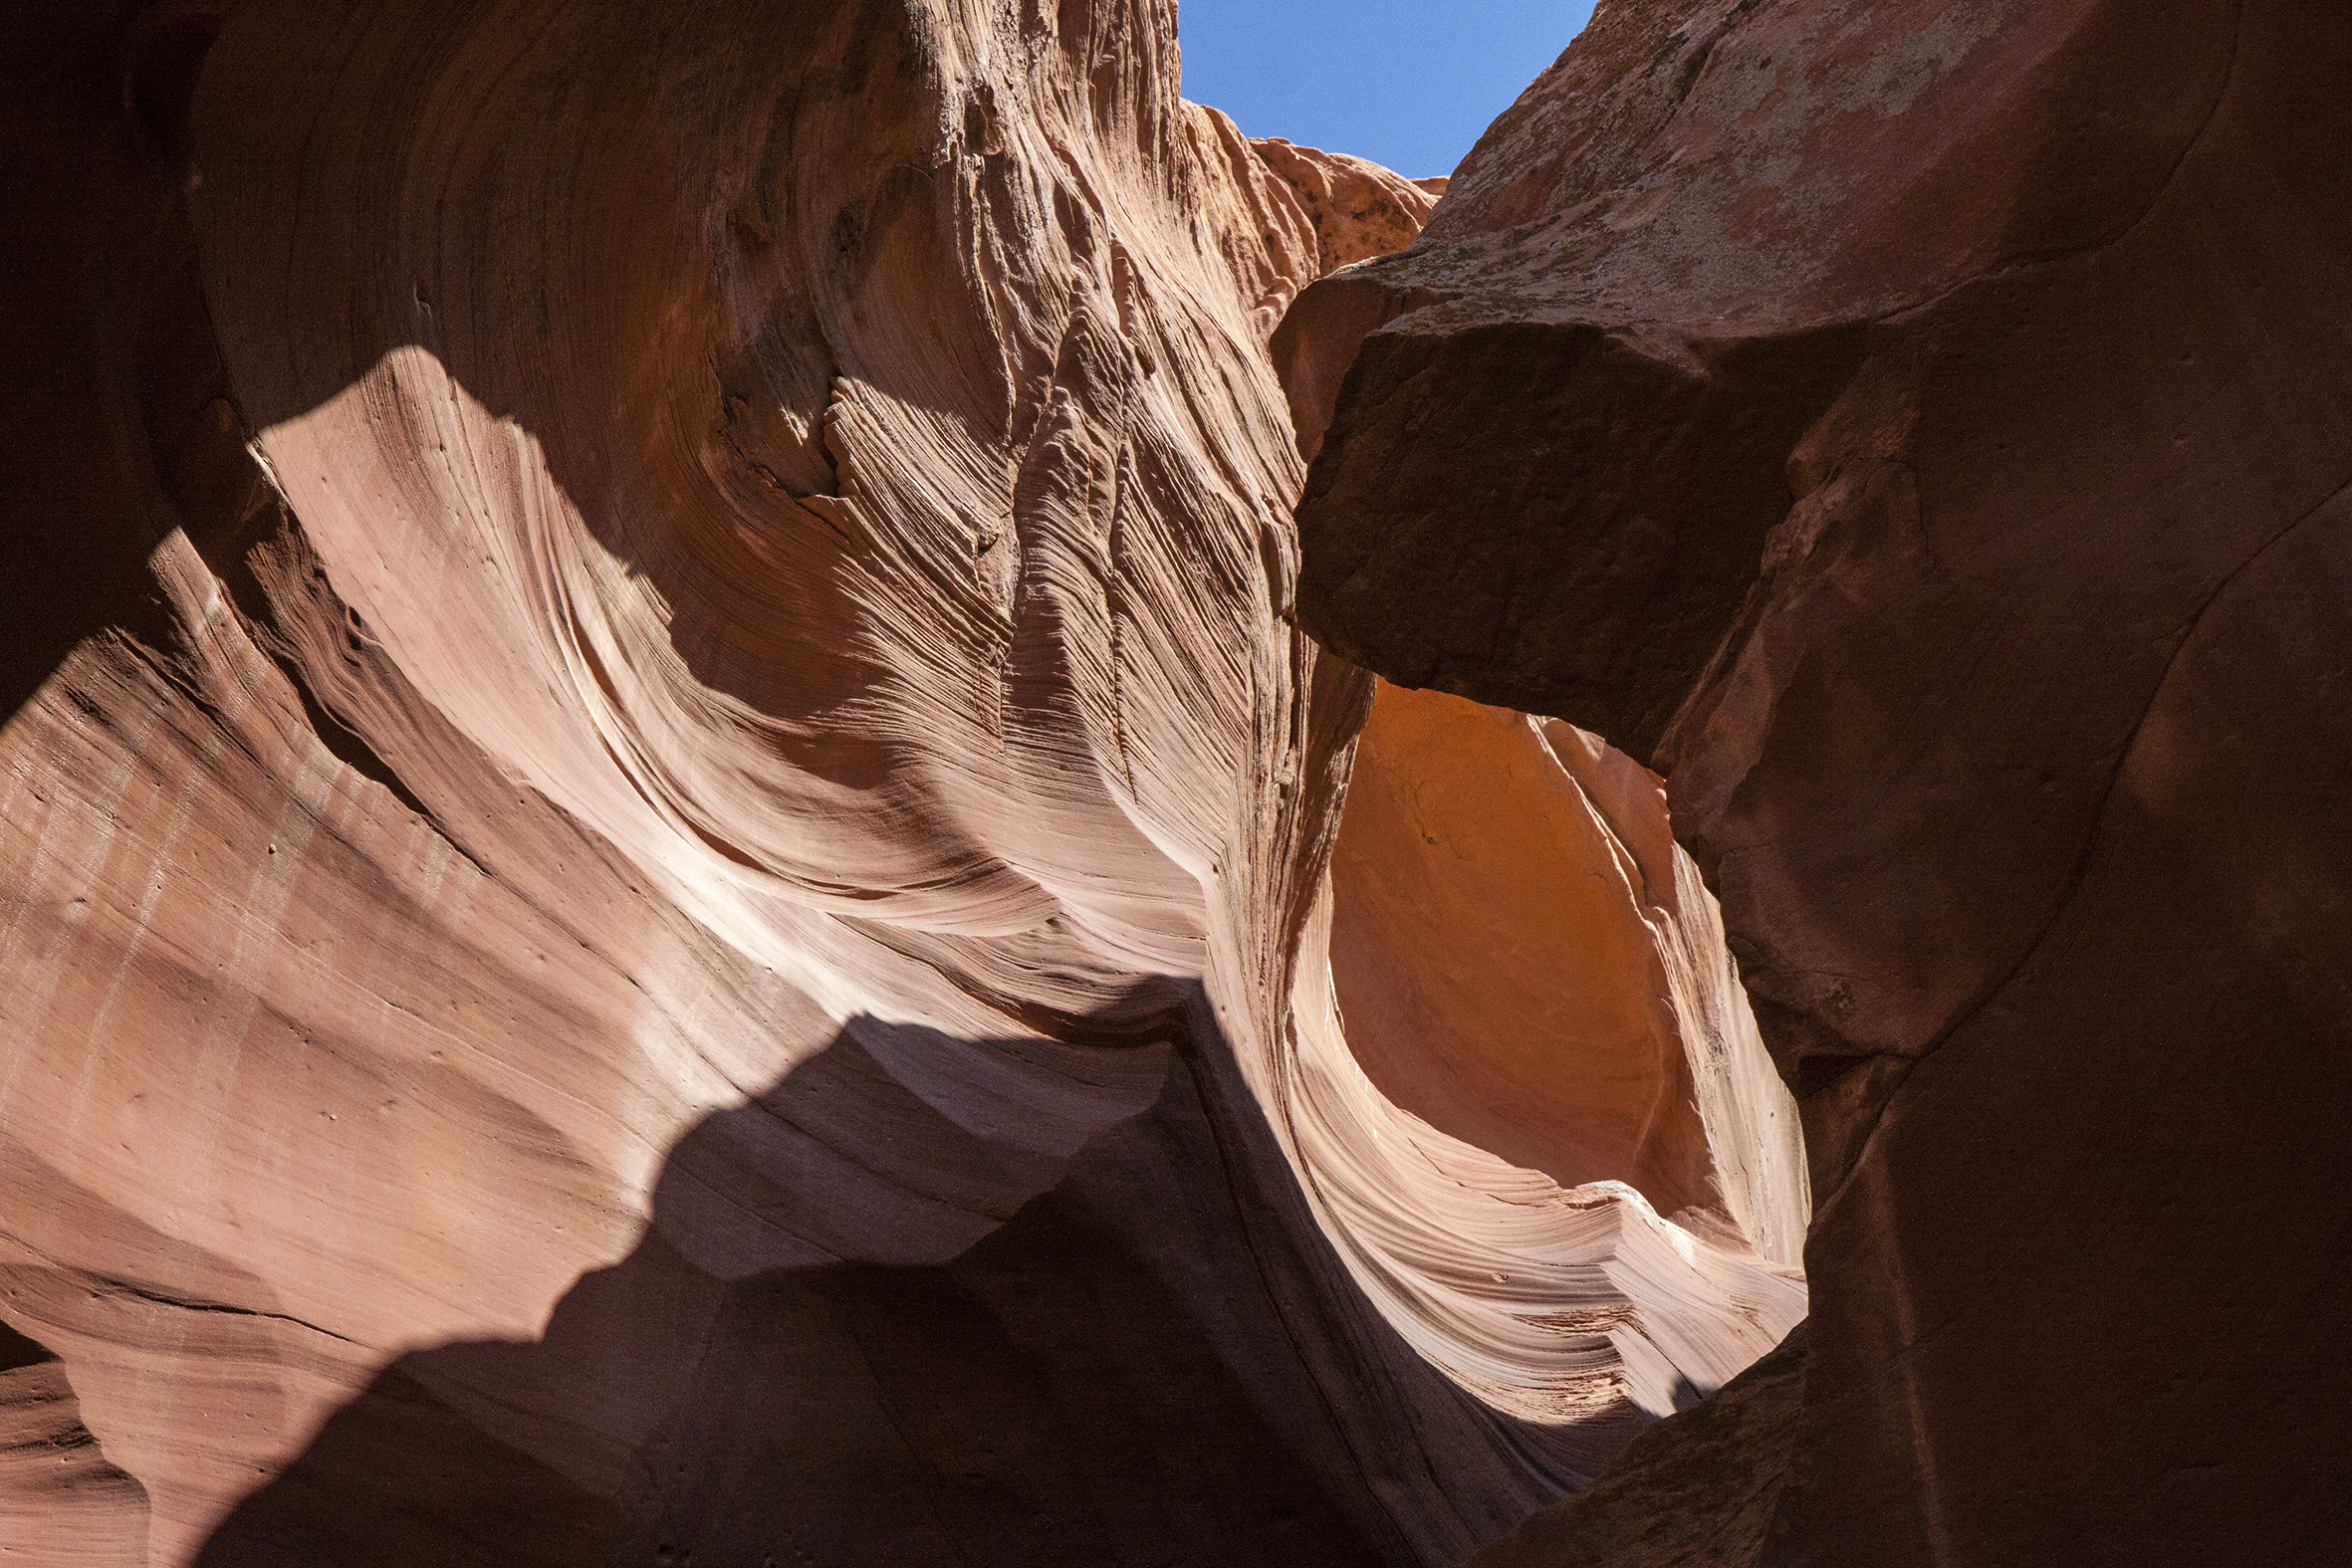 naturaliste-antelope-canyon-reserve-navajo-usa-ouest-2012-marie-colette-becker-02